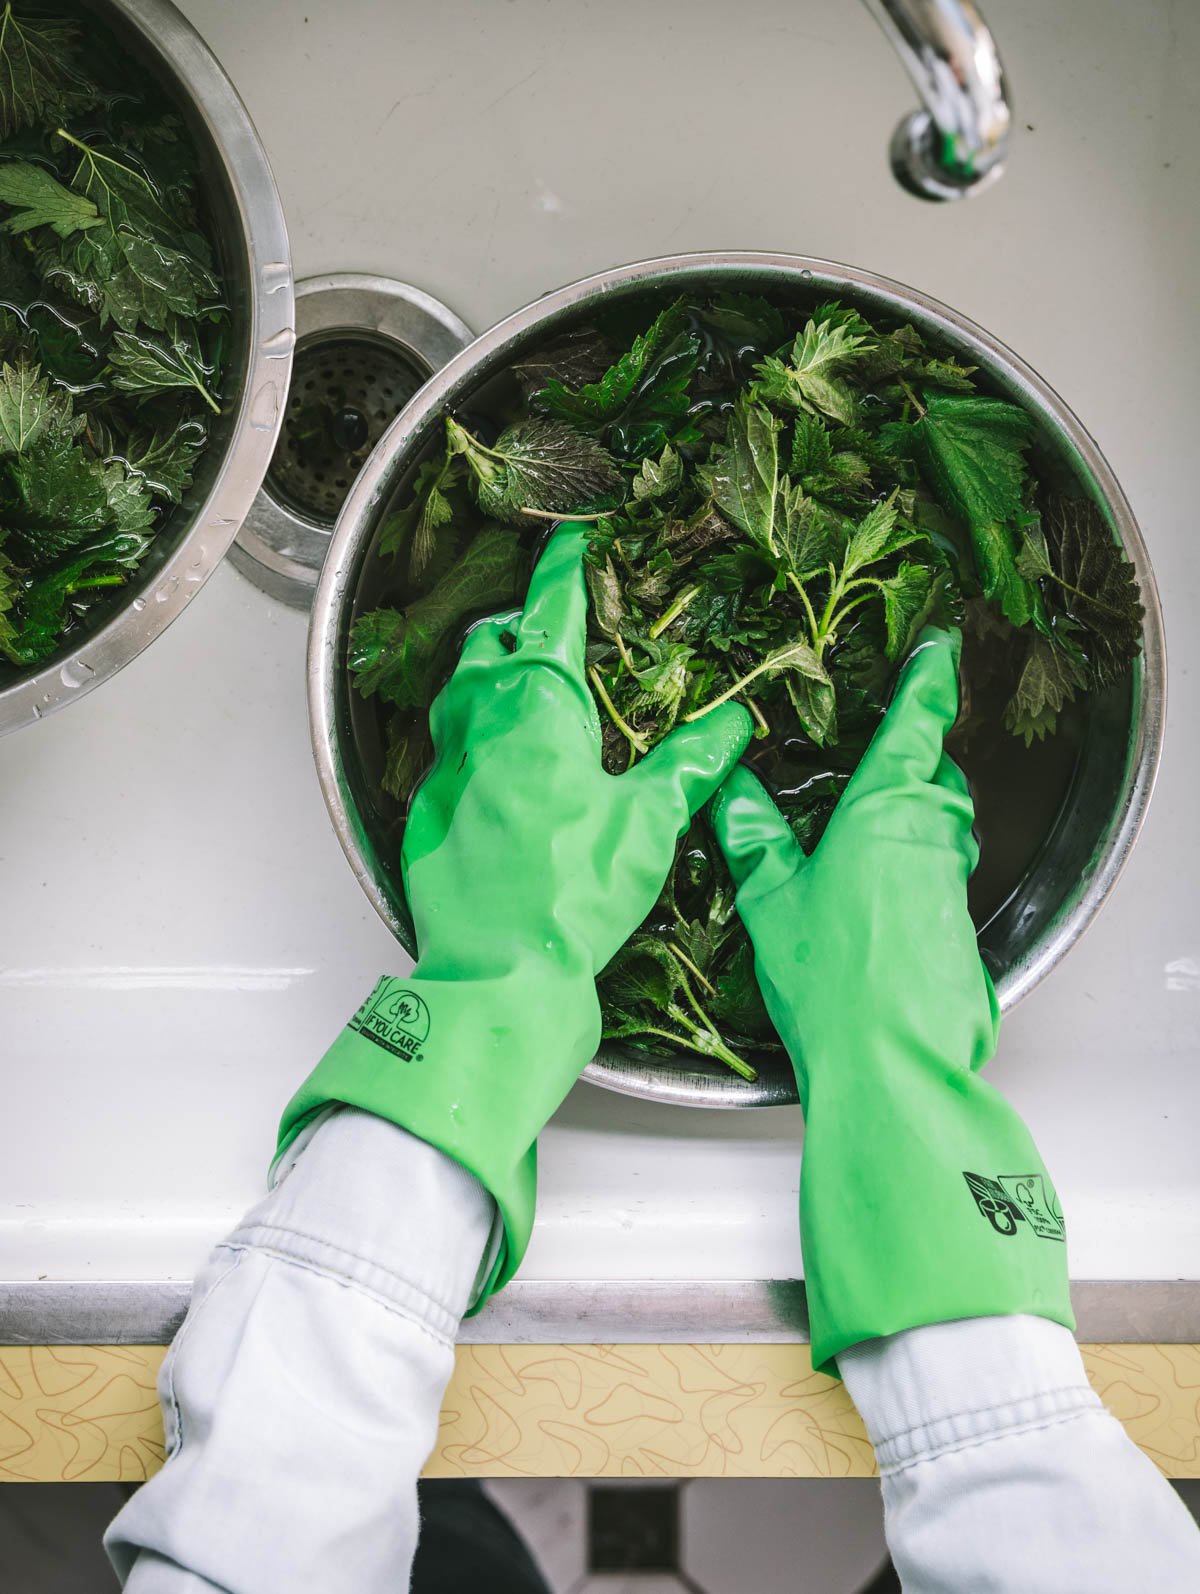 Washing stinging nettles leaves in a sink.